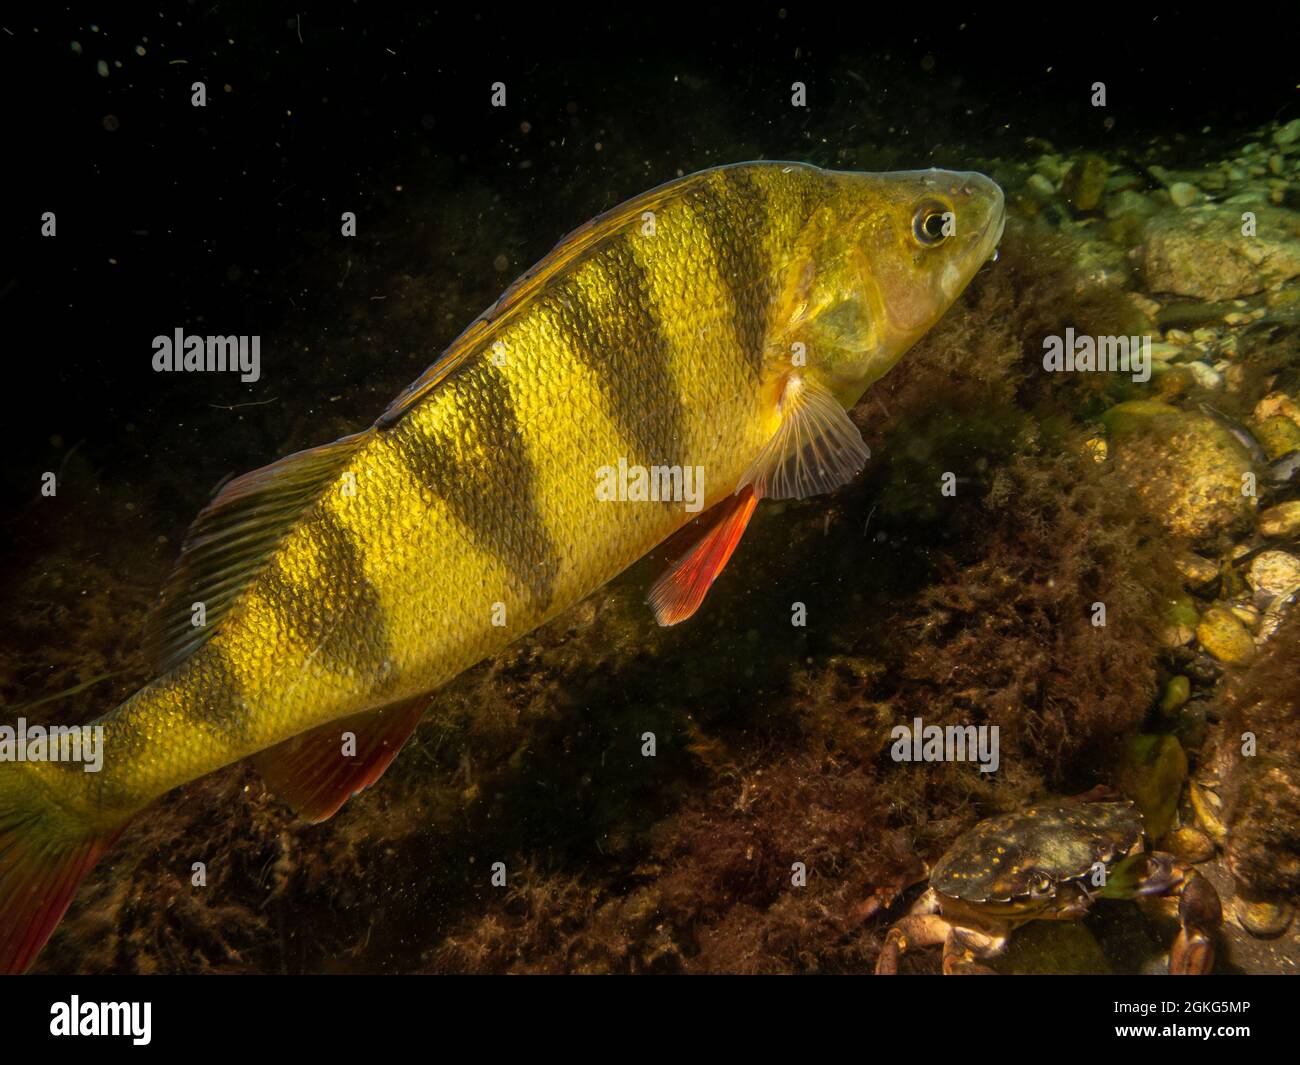 A close-up picture of a European perch, Perca fluviatilis, in cold Northern European waters. Black ocean background Stock Photo